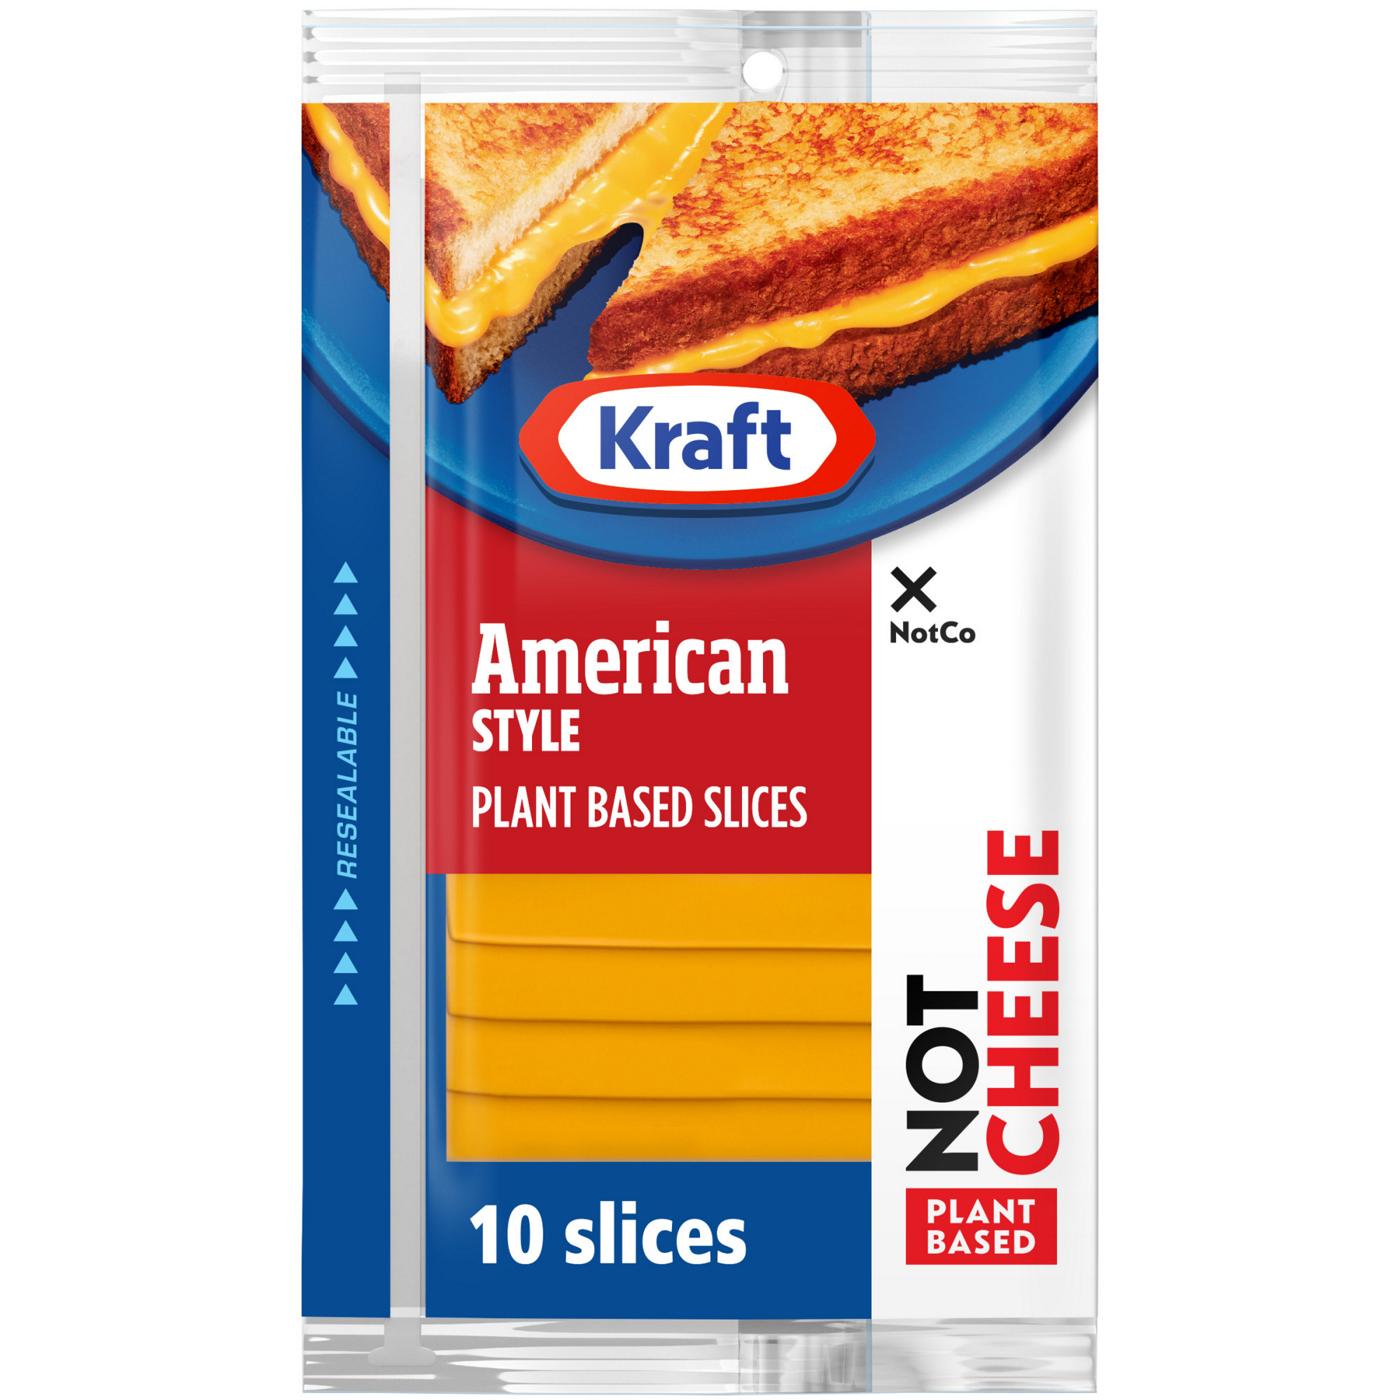 Kraft Not Cheese Plant Based Slices - American Style; image 1 of 8